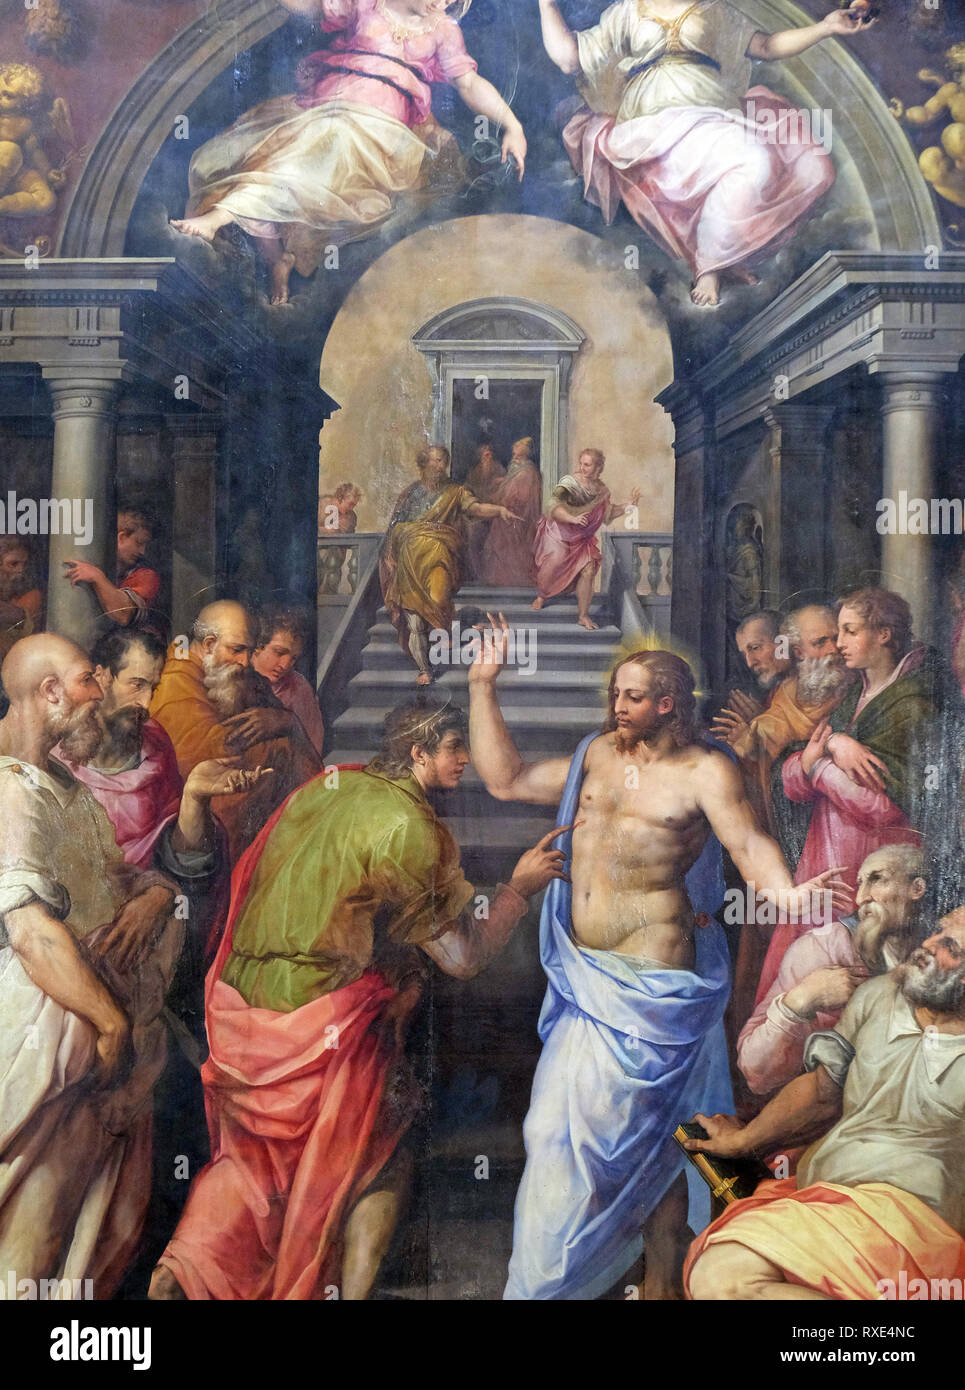 The Incredulity of St. Thomas, 1572 by Giorgio Vasari, Basilica of Santa Croce (Basilica of the Holy Cross) in Florence, Italy Stock Photo